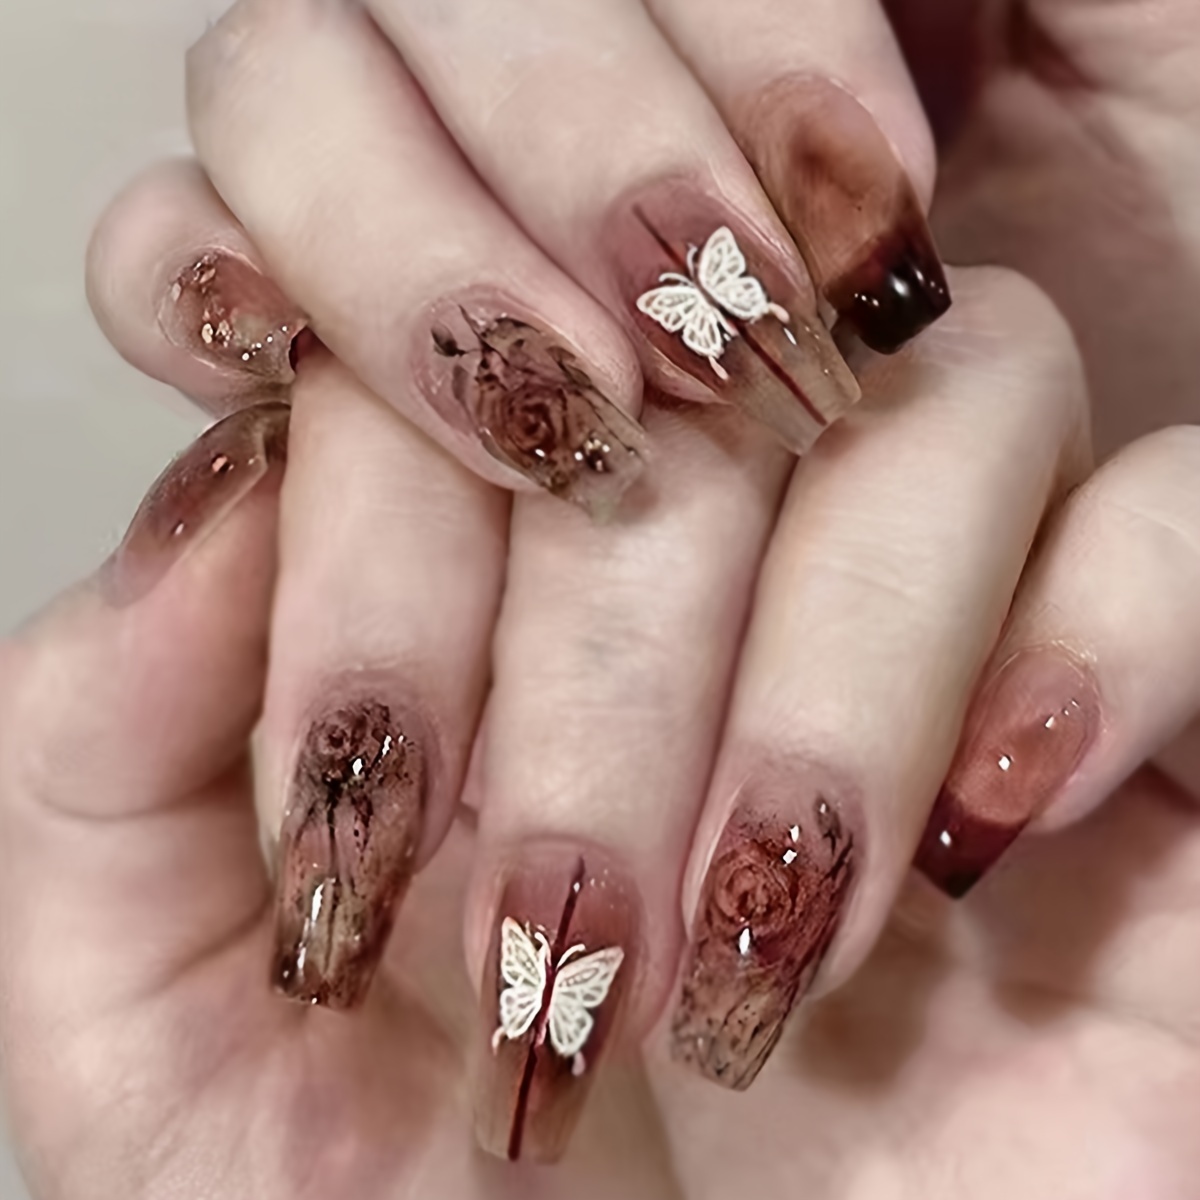 

24pcs Brown Tone Long Square Press On Nails With Aura Pattern, Glossy Ballet Ice Butterfly Design, Fashionable & Versatile Fake Nails For Women And Girls - Perfect For Halloween